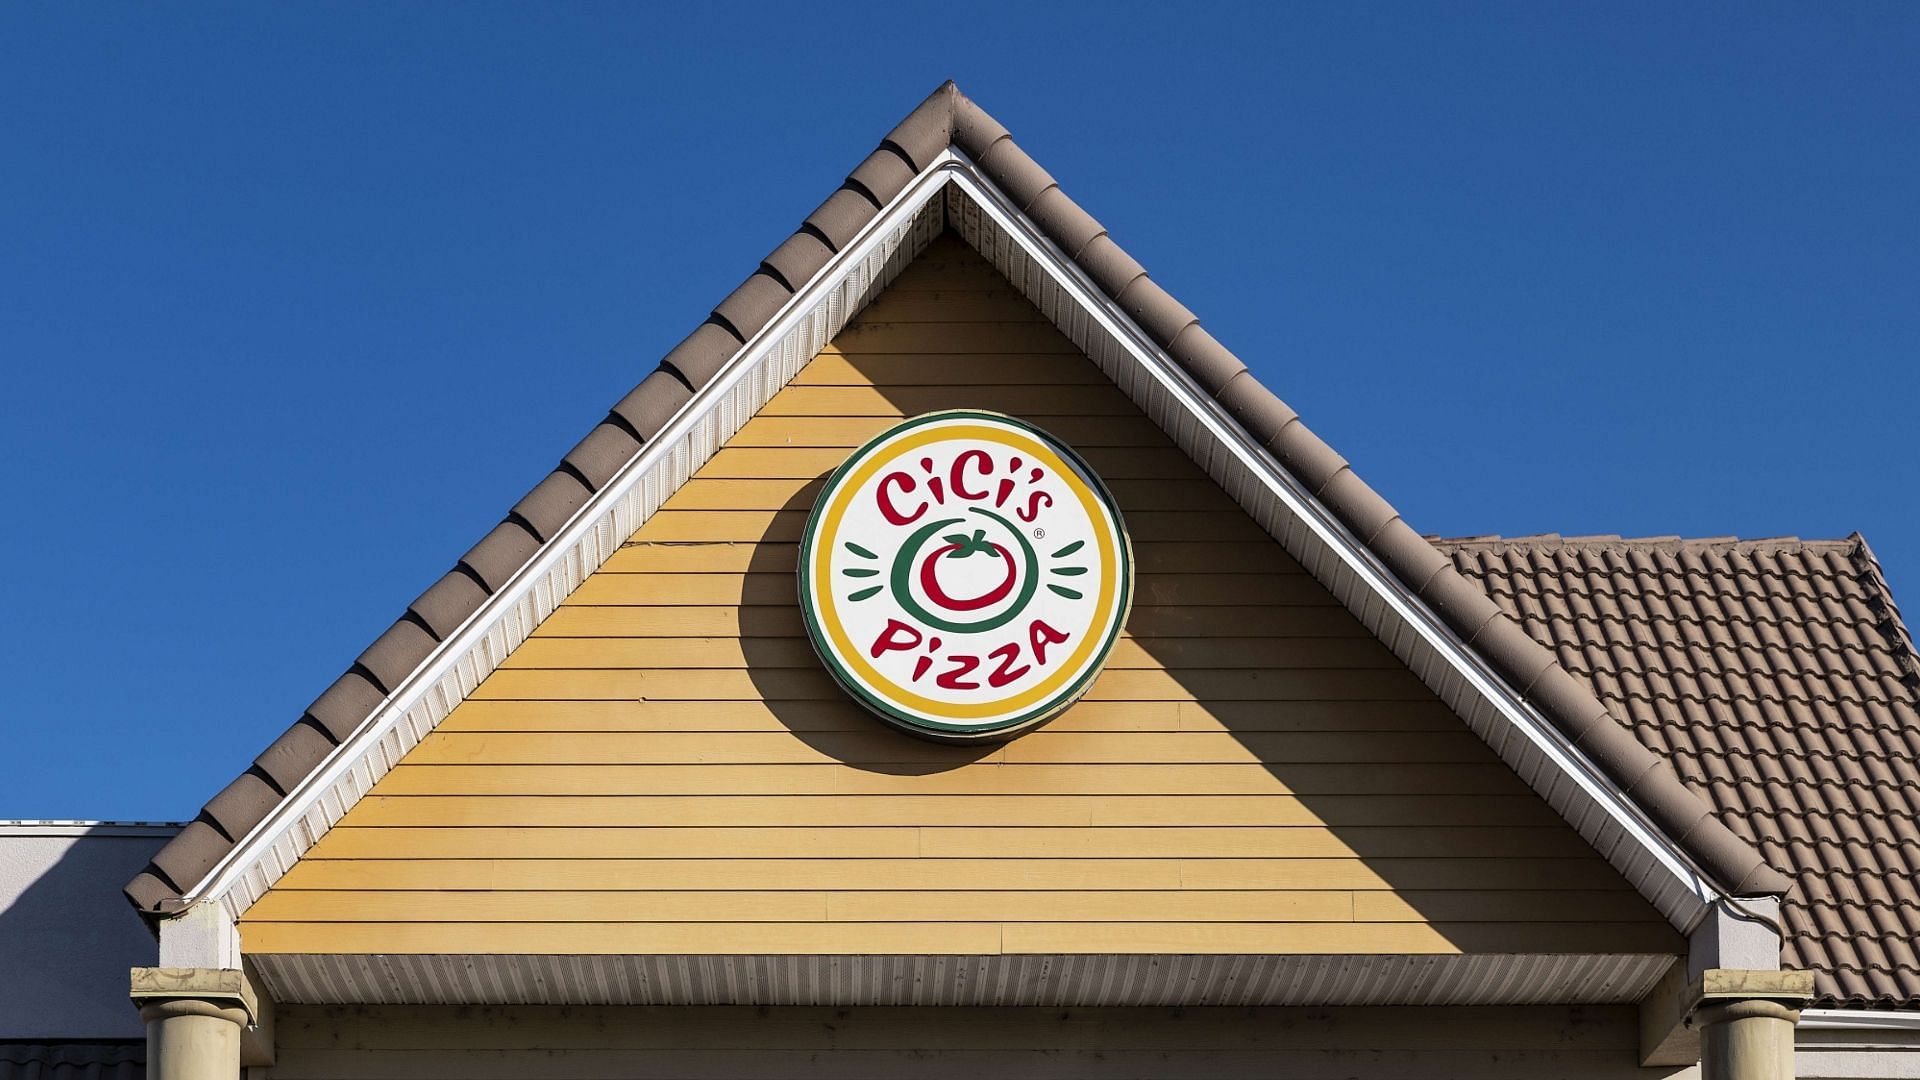 the exterior of a Cicis Pizza restaurant in the United States (Image via John Greim/LightRocket/Getty Images)